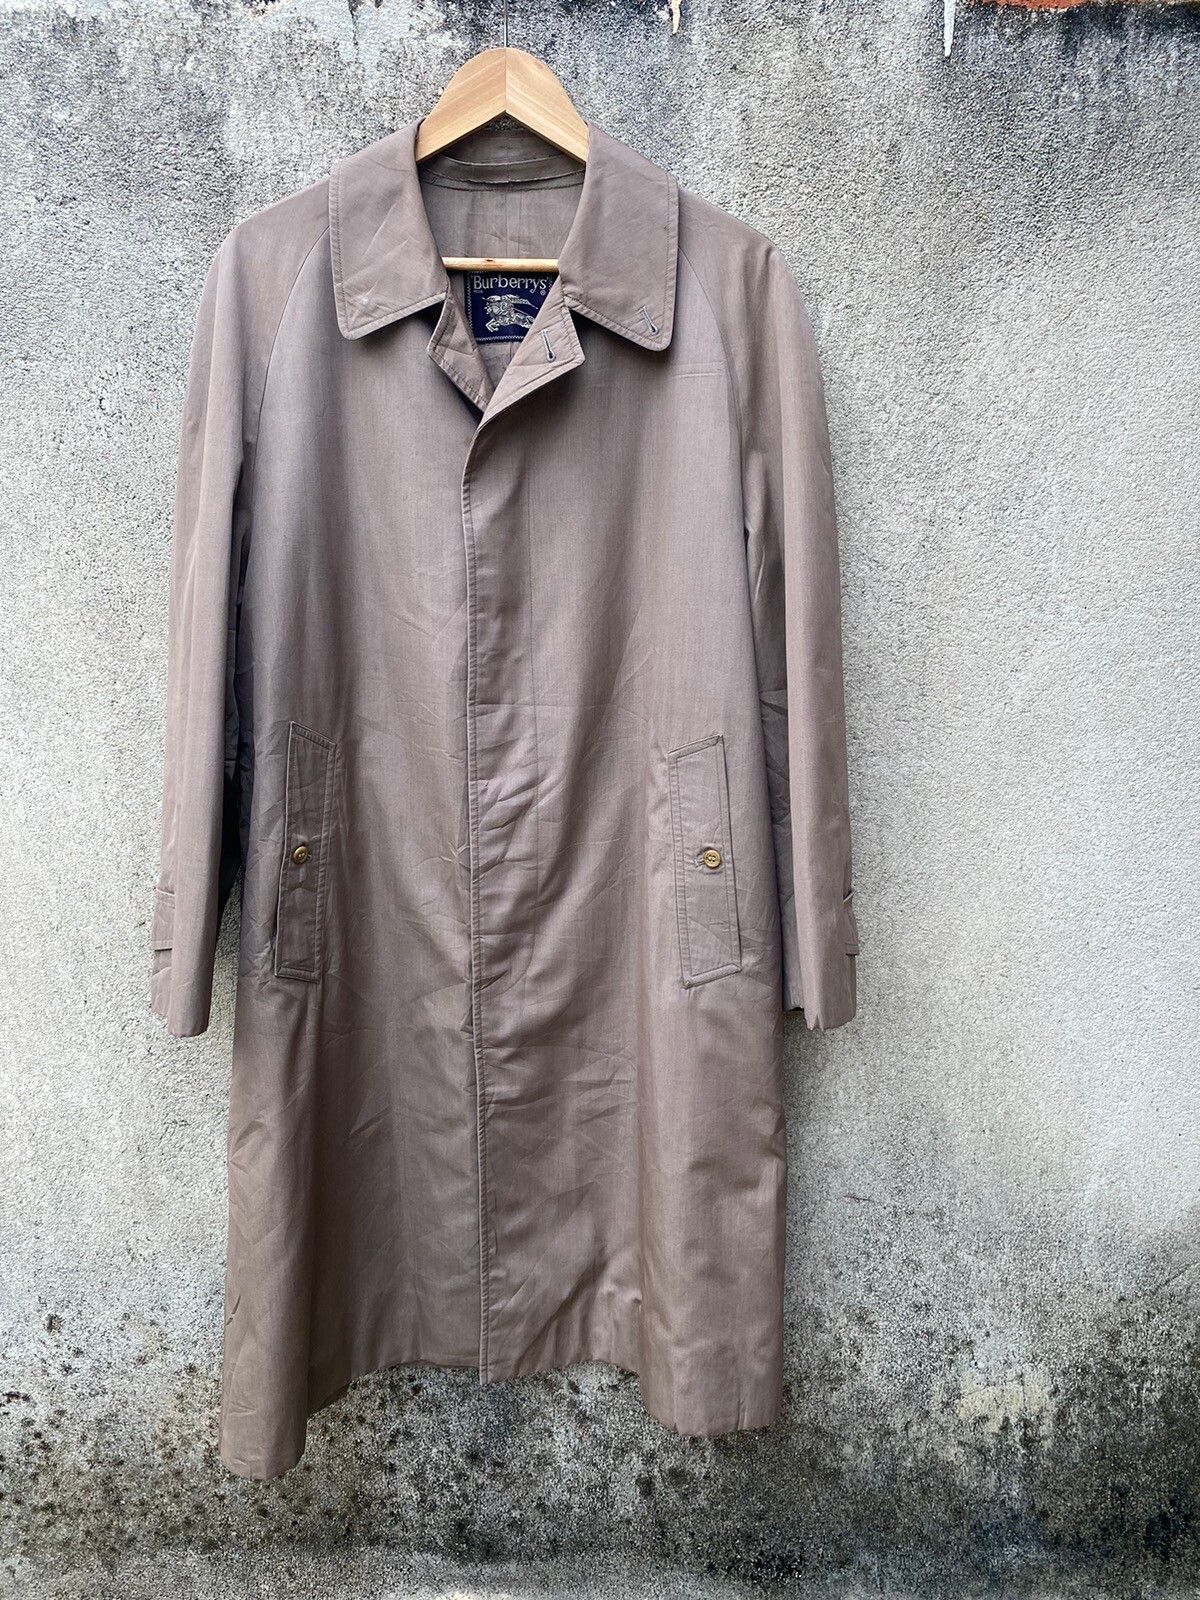 Burberry Trench Coat Single Breasted Jacket - 1